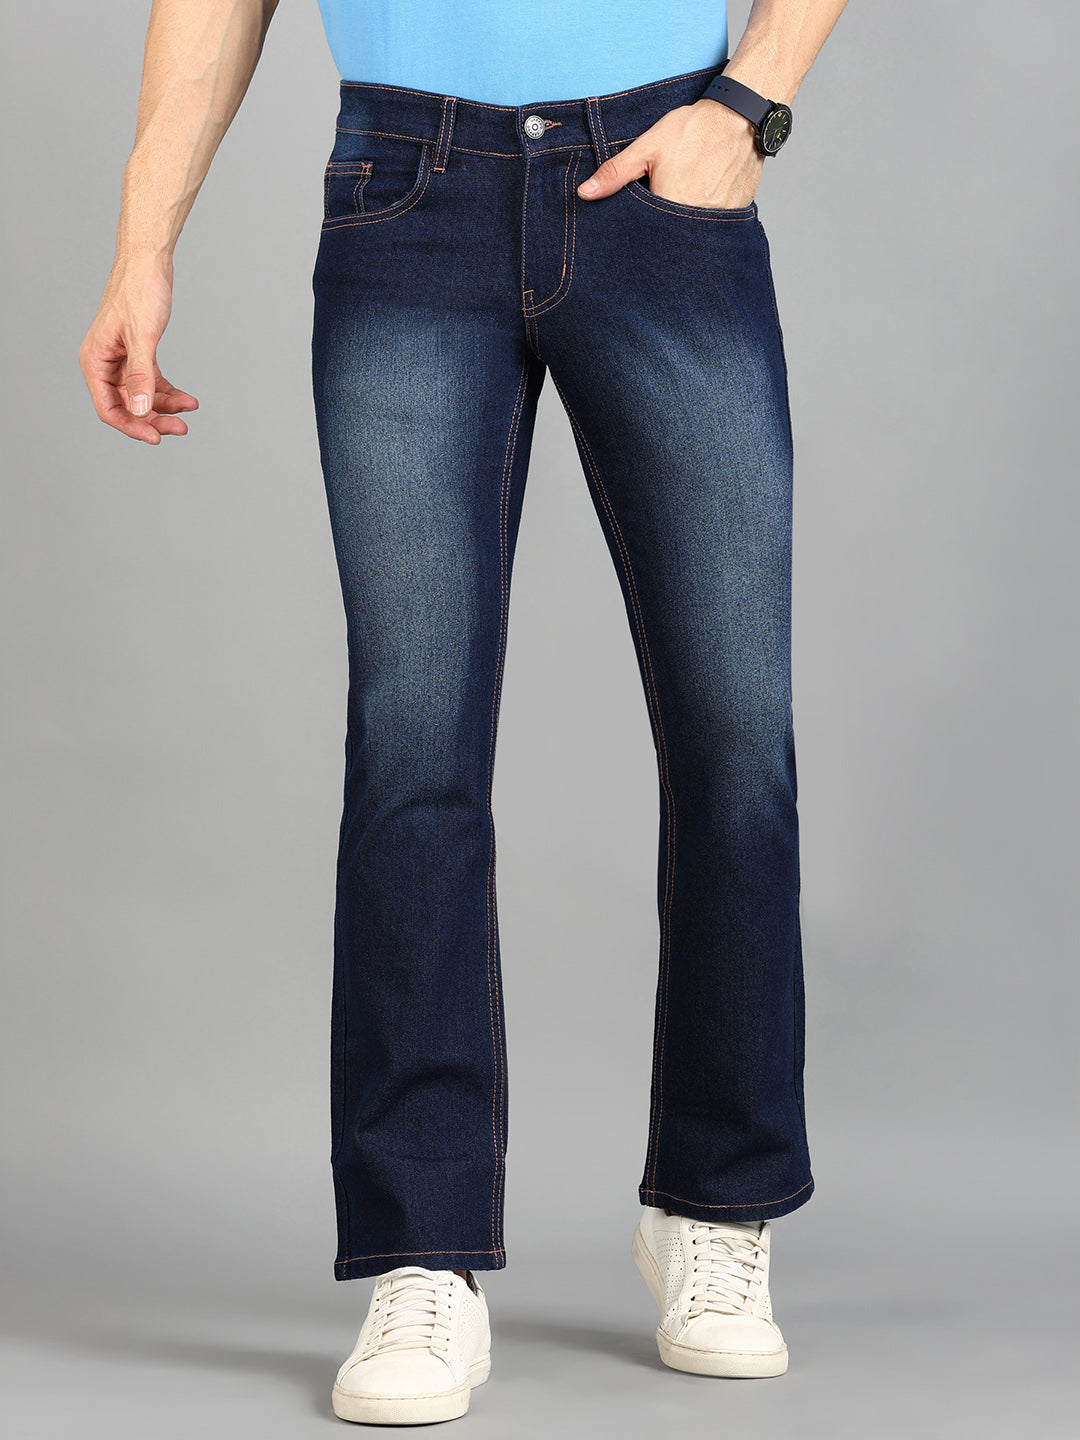 Men's Dark Blue Washed Bootcut Jeans Stretchable